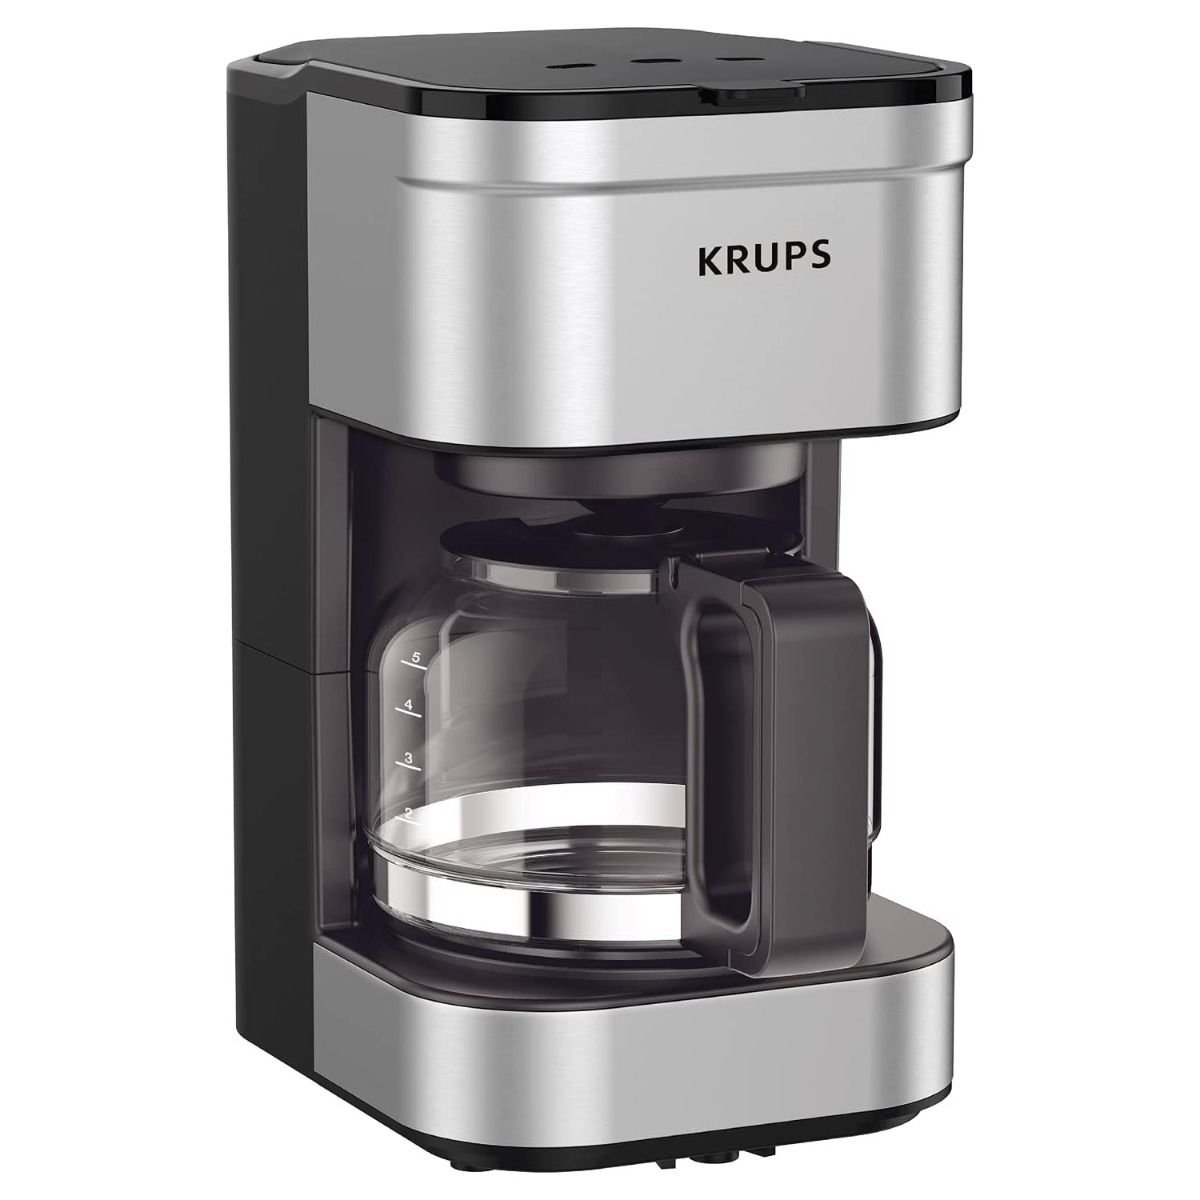 Krups KM202850 Simply Brew Compact Filter Drip Coffee Maker, 5-Cup, Silver